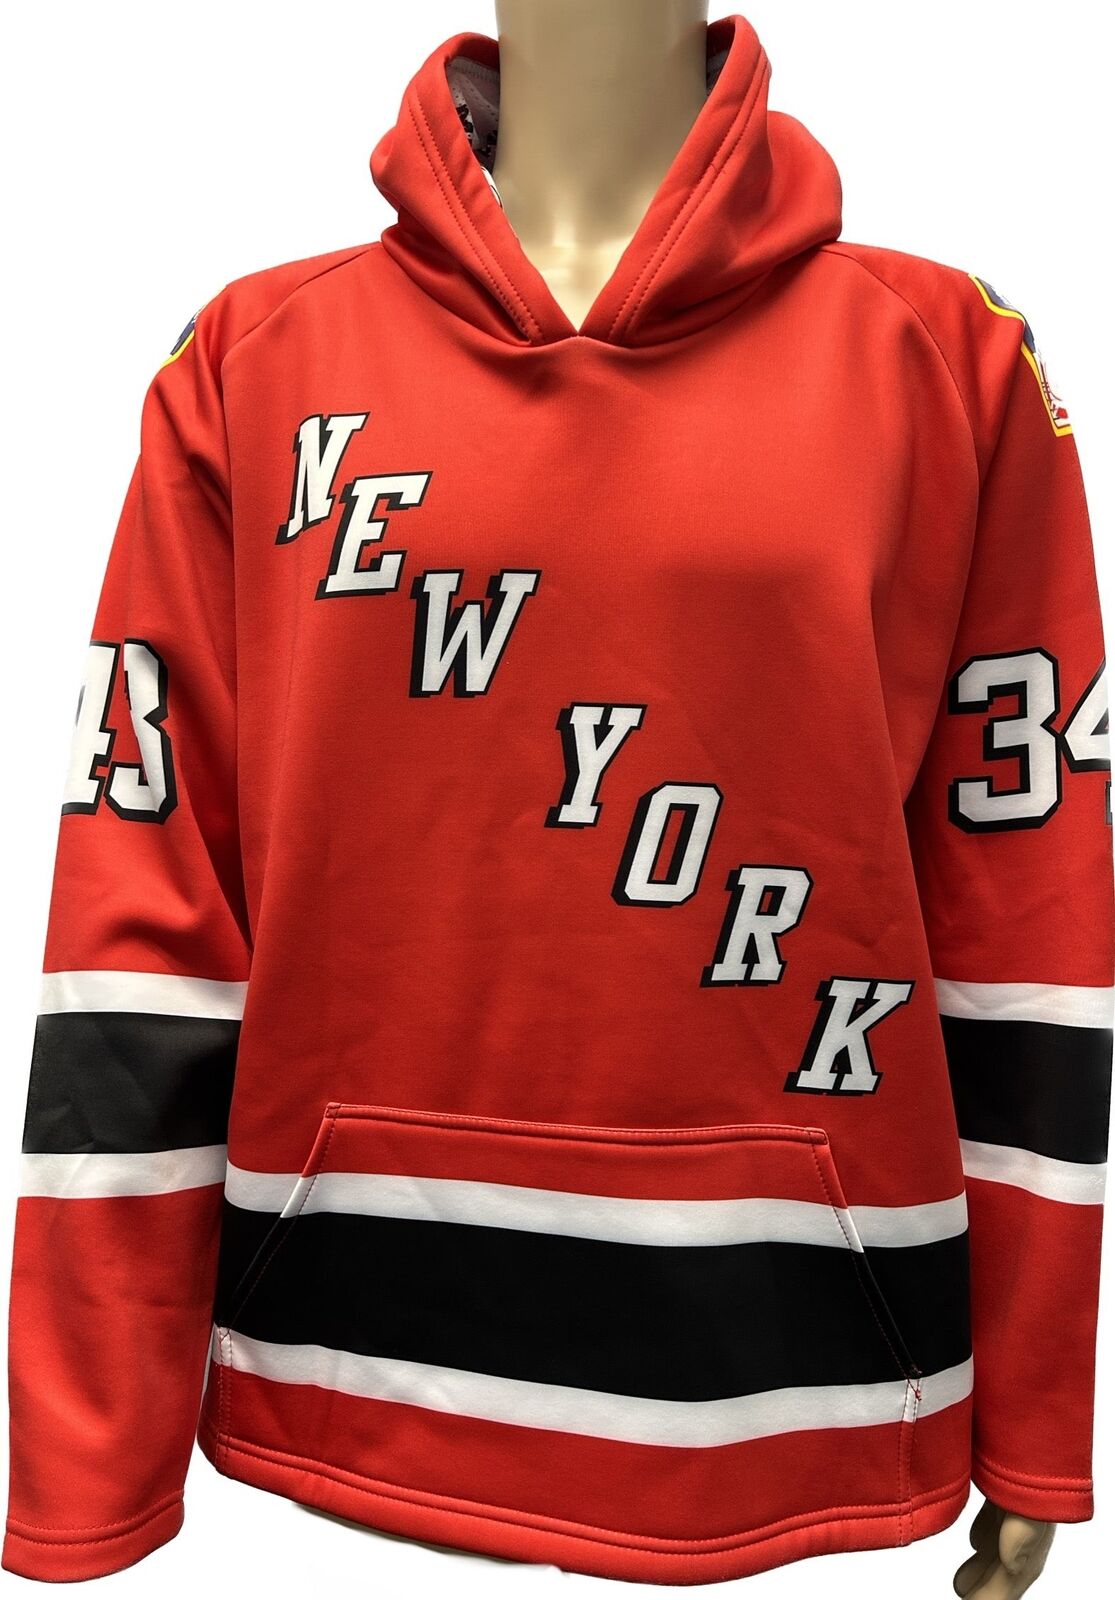 FDNY 343 Official 9/11 Memorial Hockey Hoodie to Commemorate The 343 Lives Lost